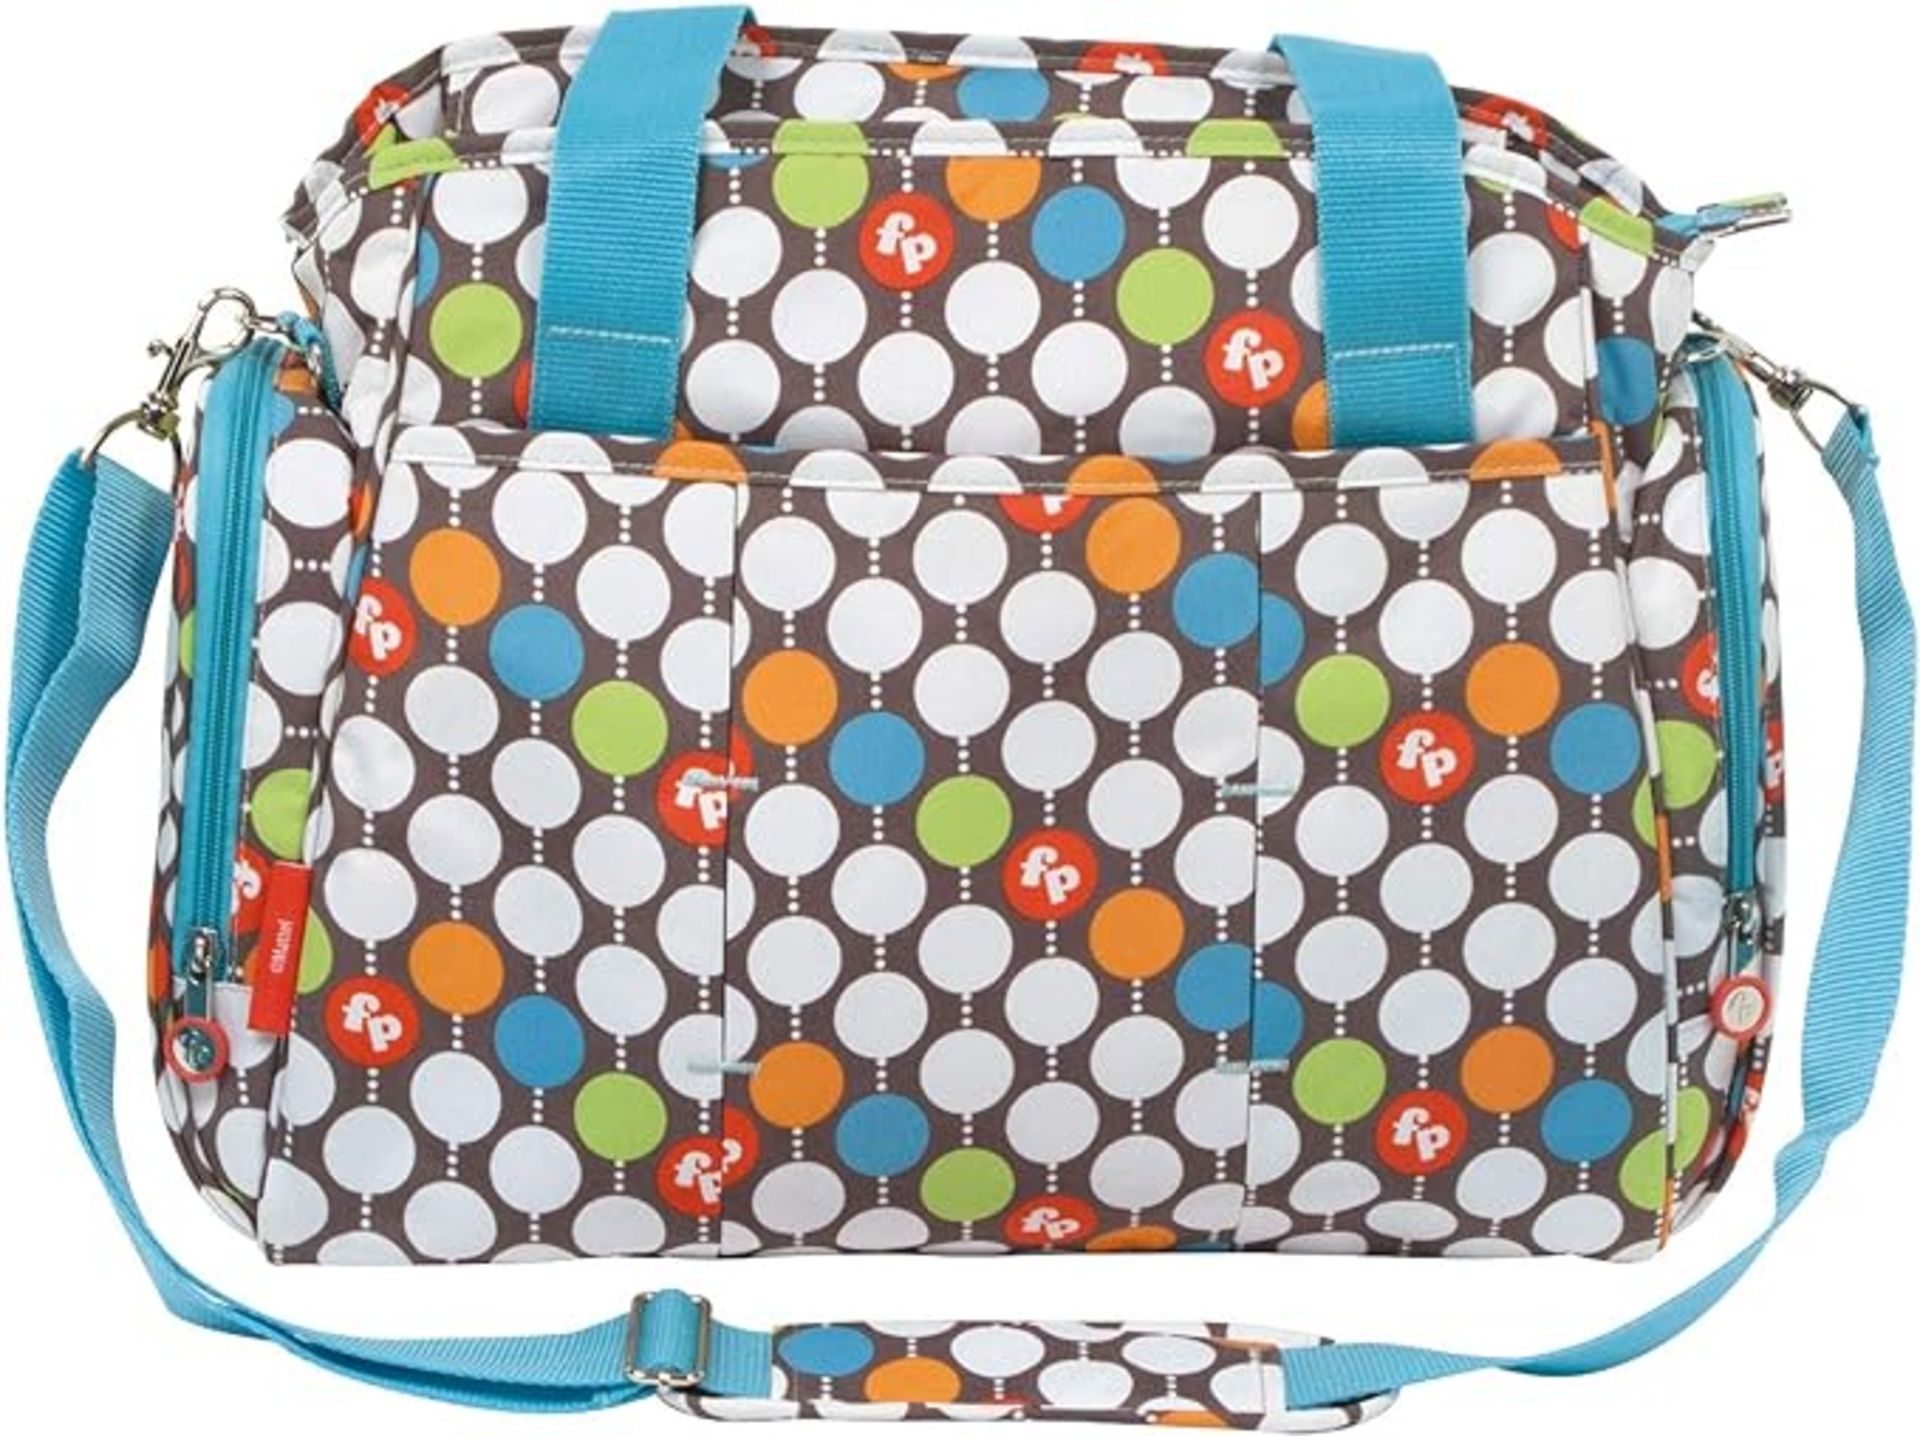 10 X NEW FISHER PRICE BABY BAG+ACC 37X17X32.5 DOTS - Image 6 of 6